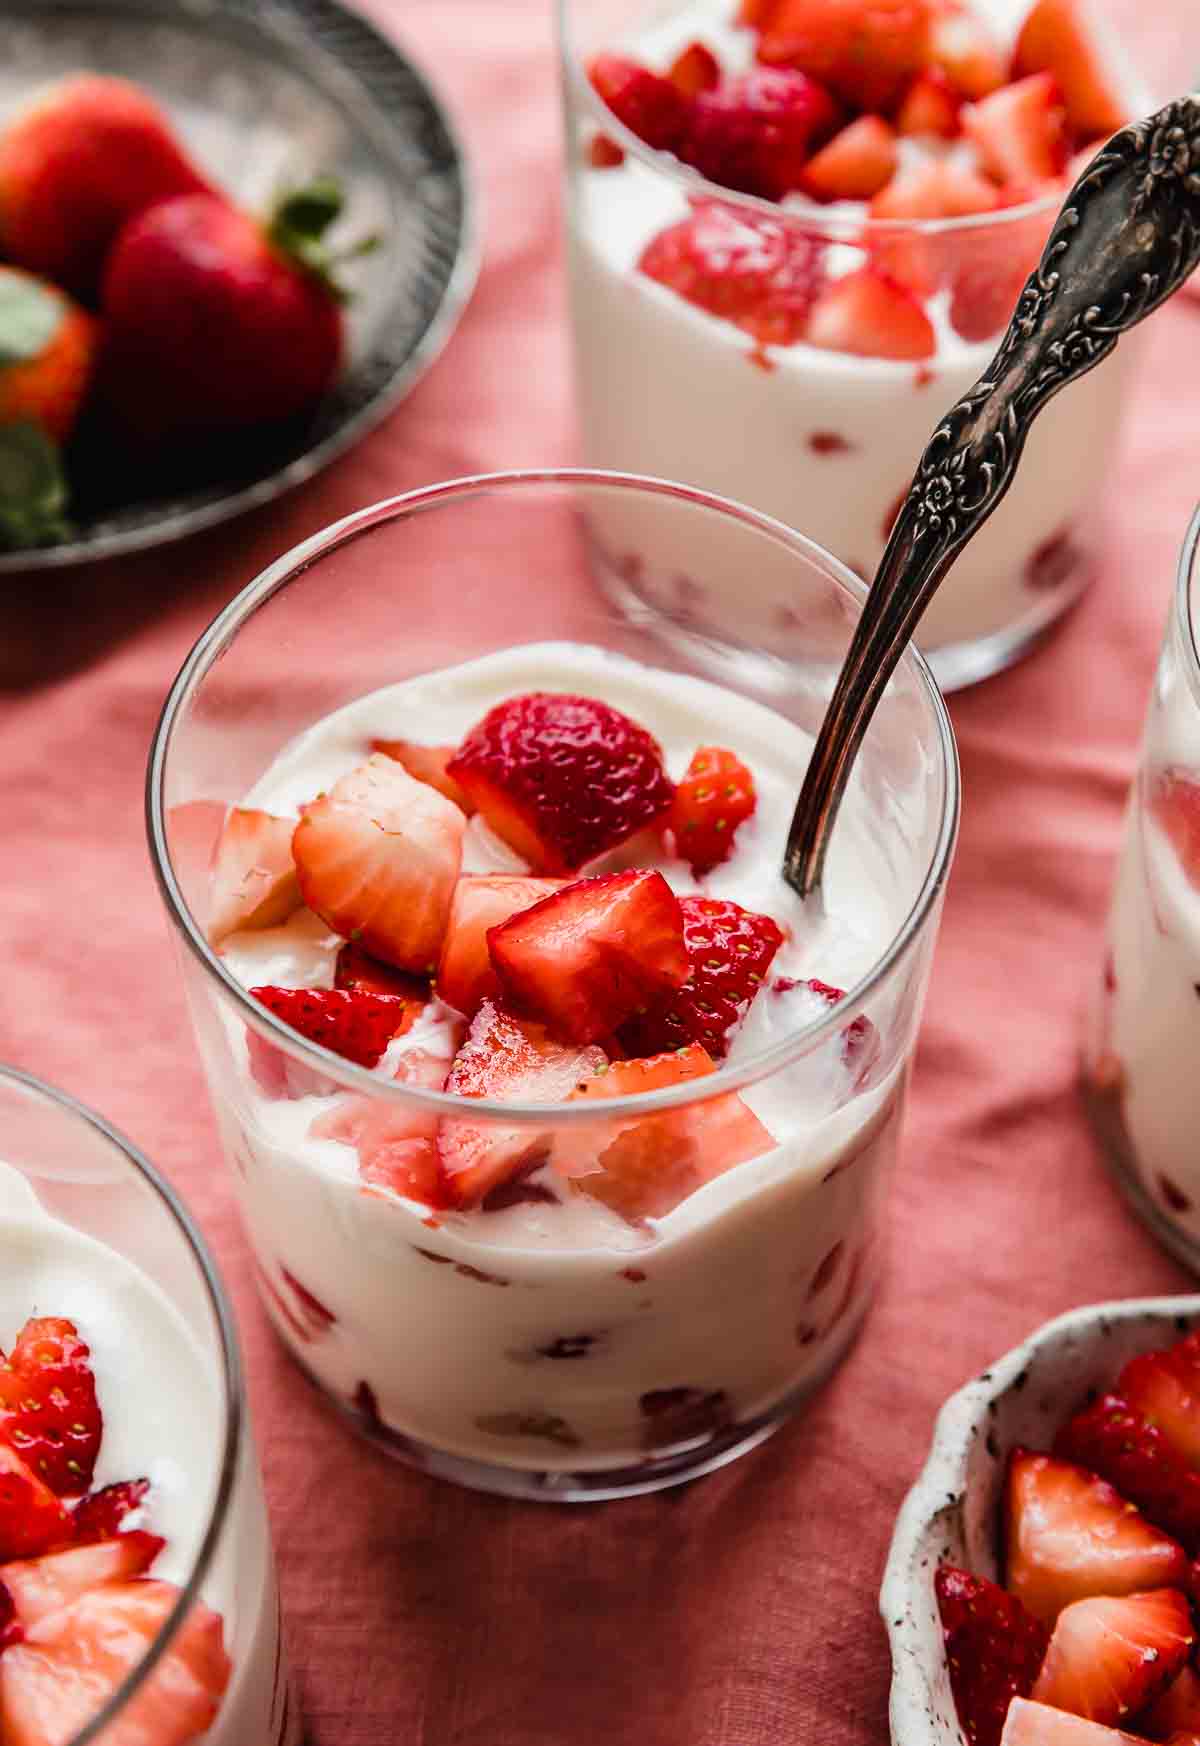 A glass cup filled with Strawberries and Cream (Fresas con Crema), on a light red linen napkin.